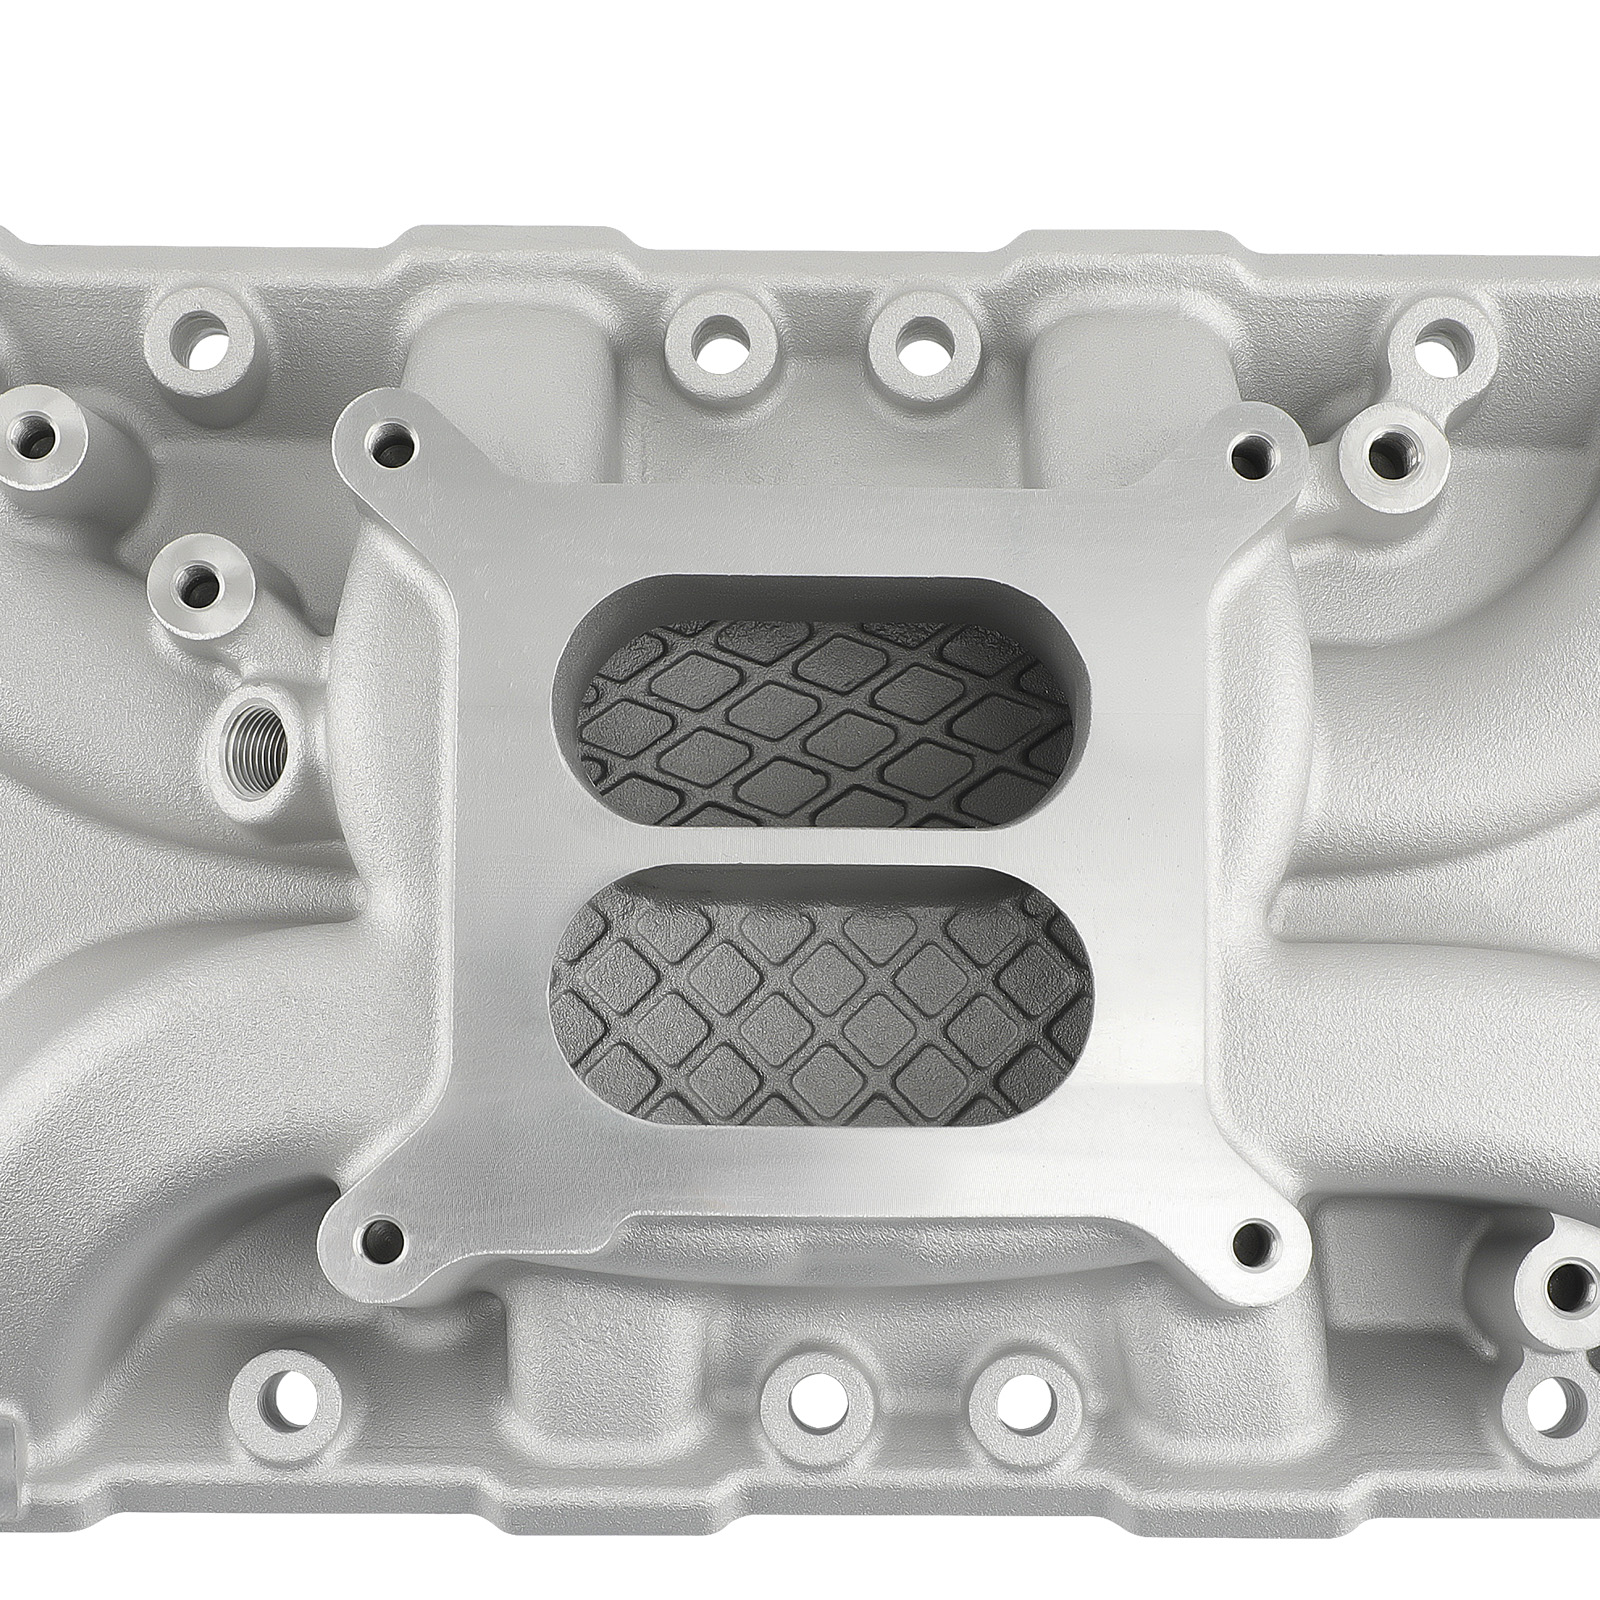 Dual Plane Aluminum Intake Manifold fit for Small Block Ford SBF V8 260 289 302